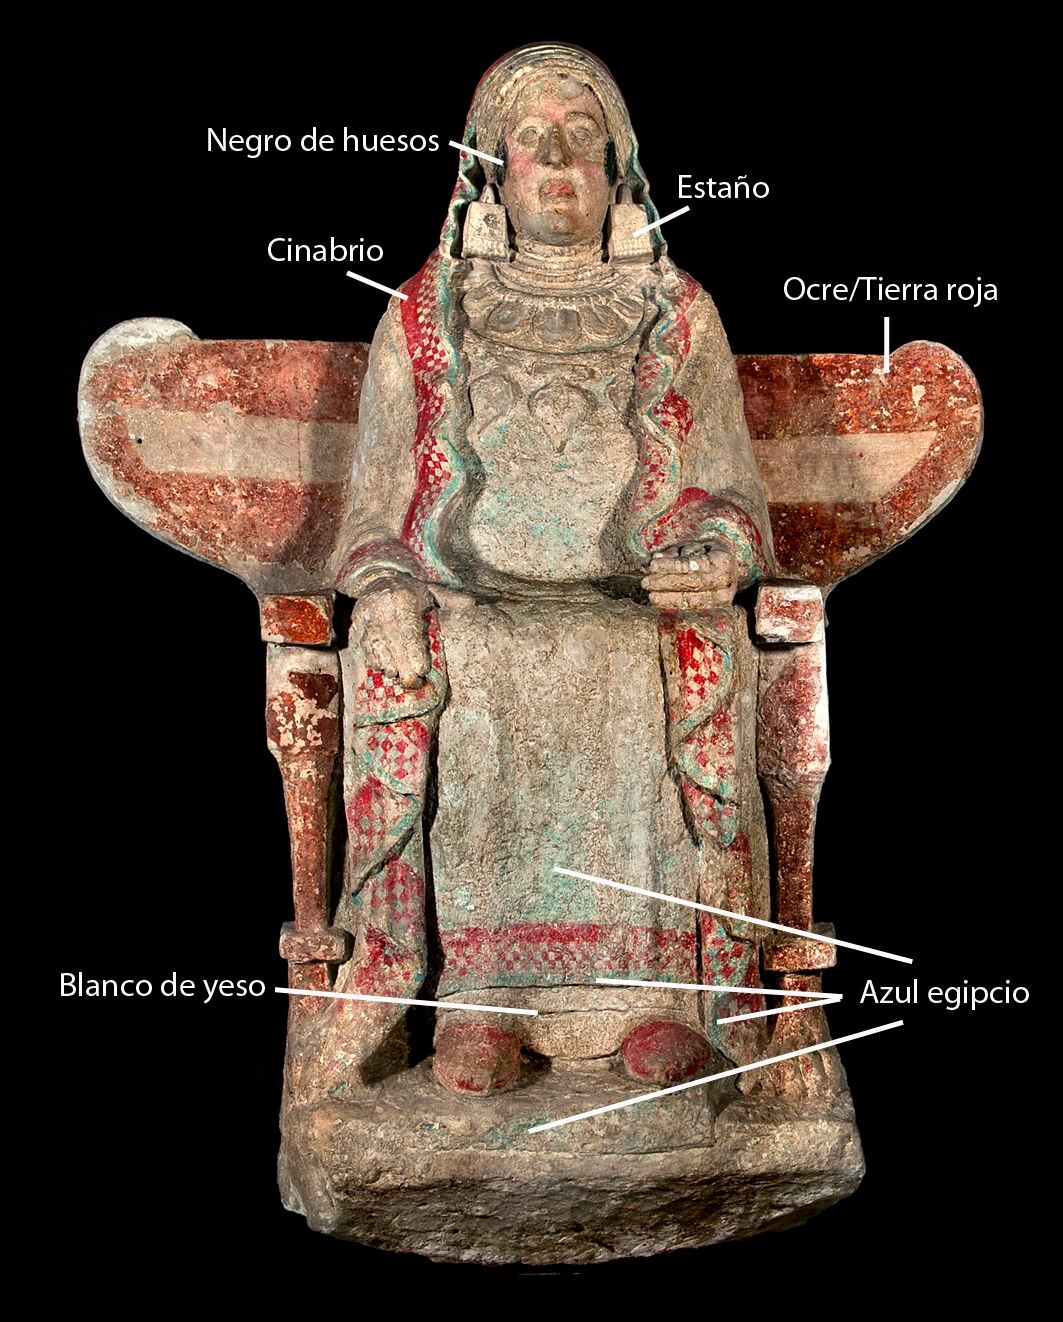 Pigments used on the Lady of Baza became visible after eliminating specular light.